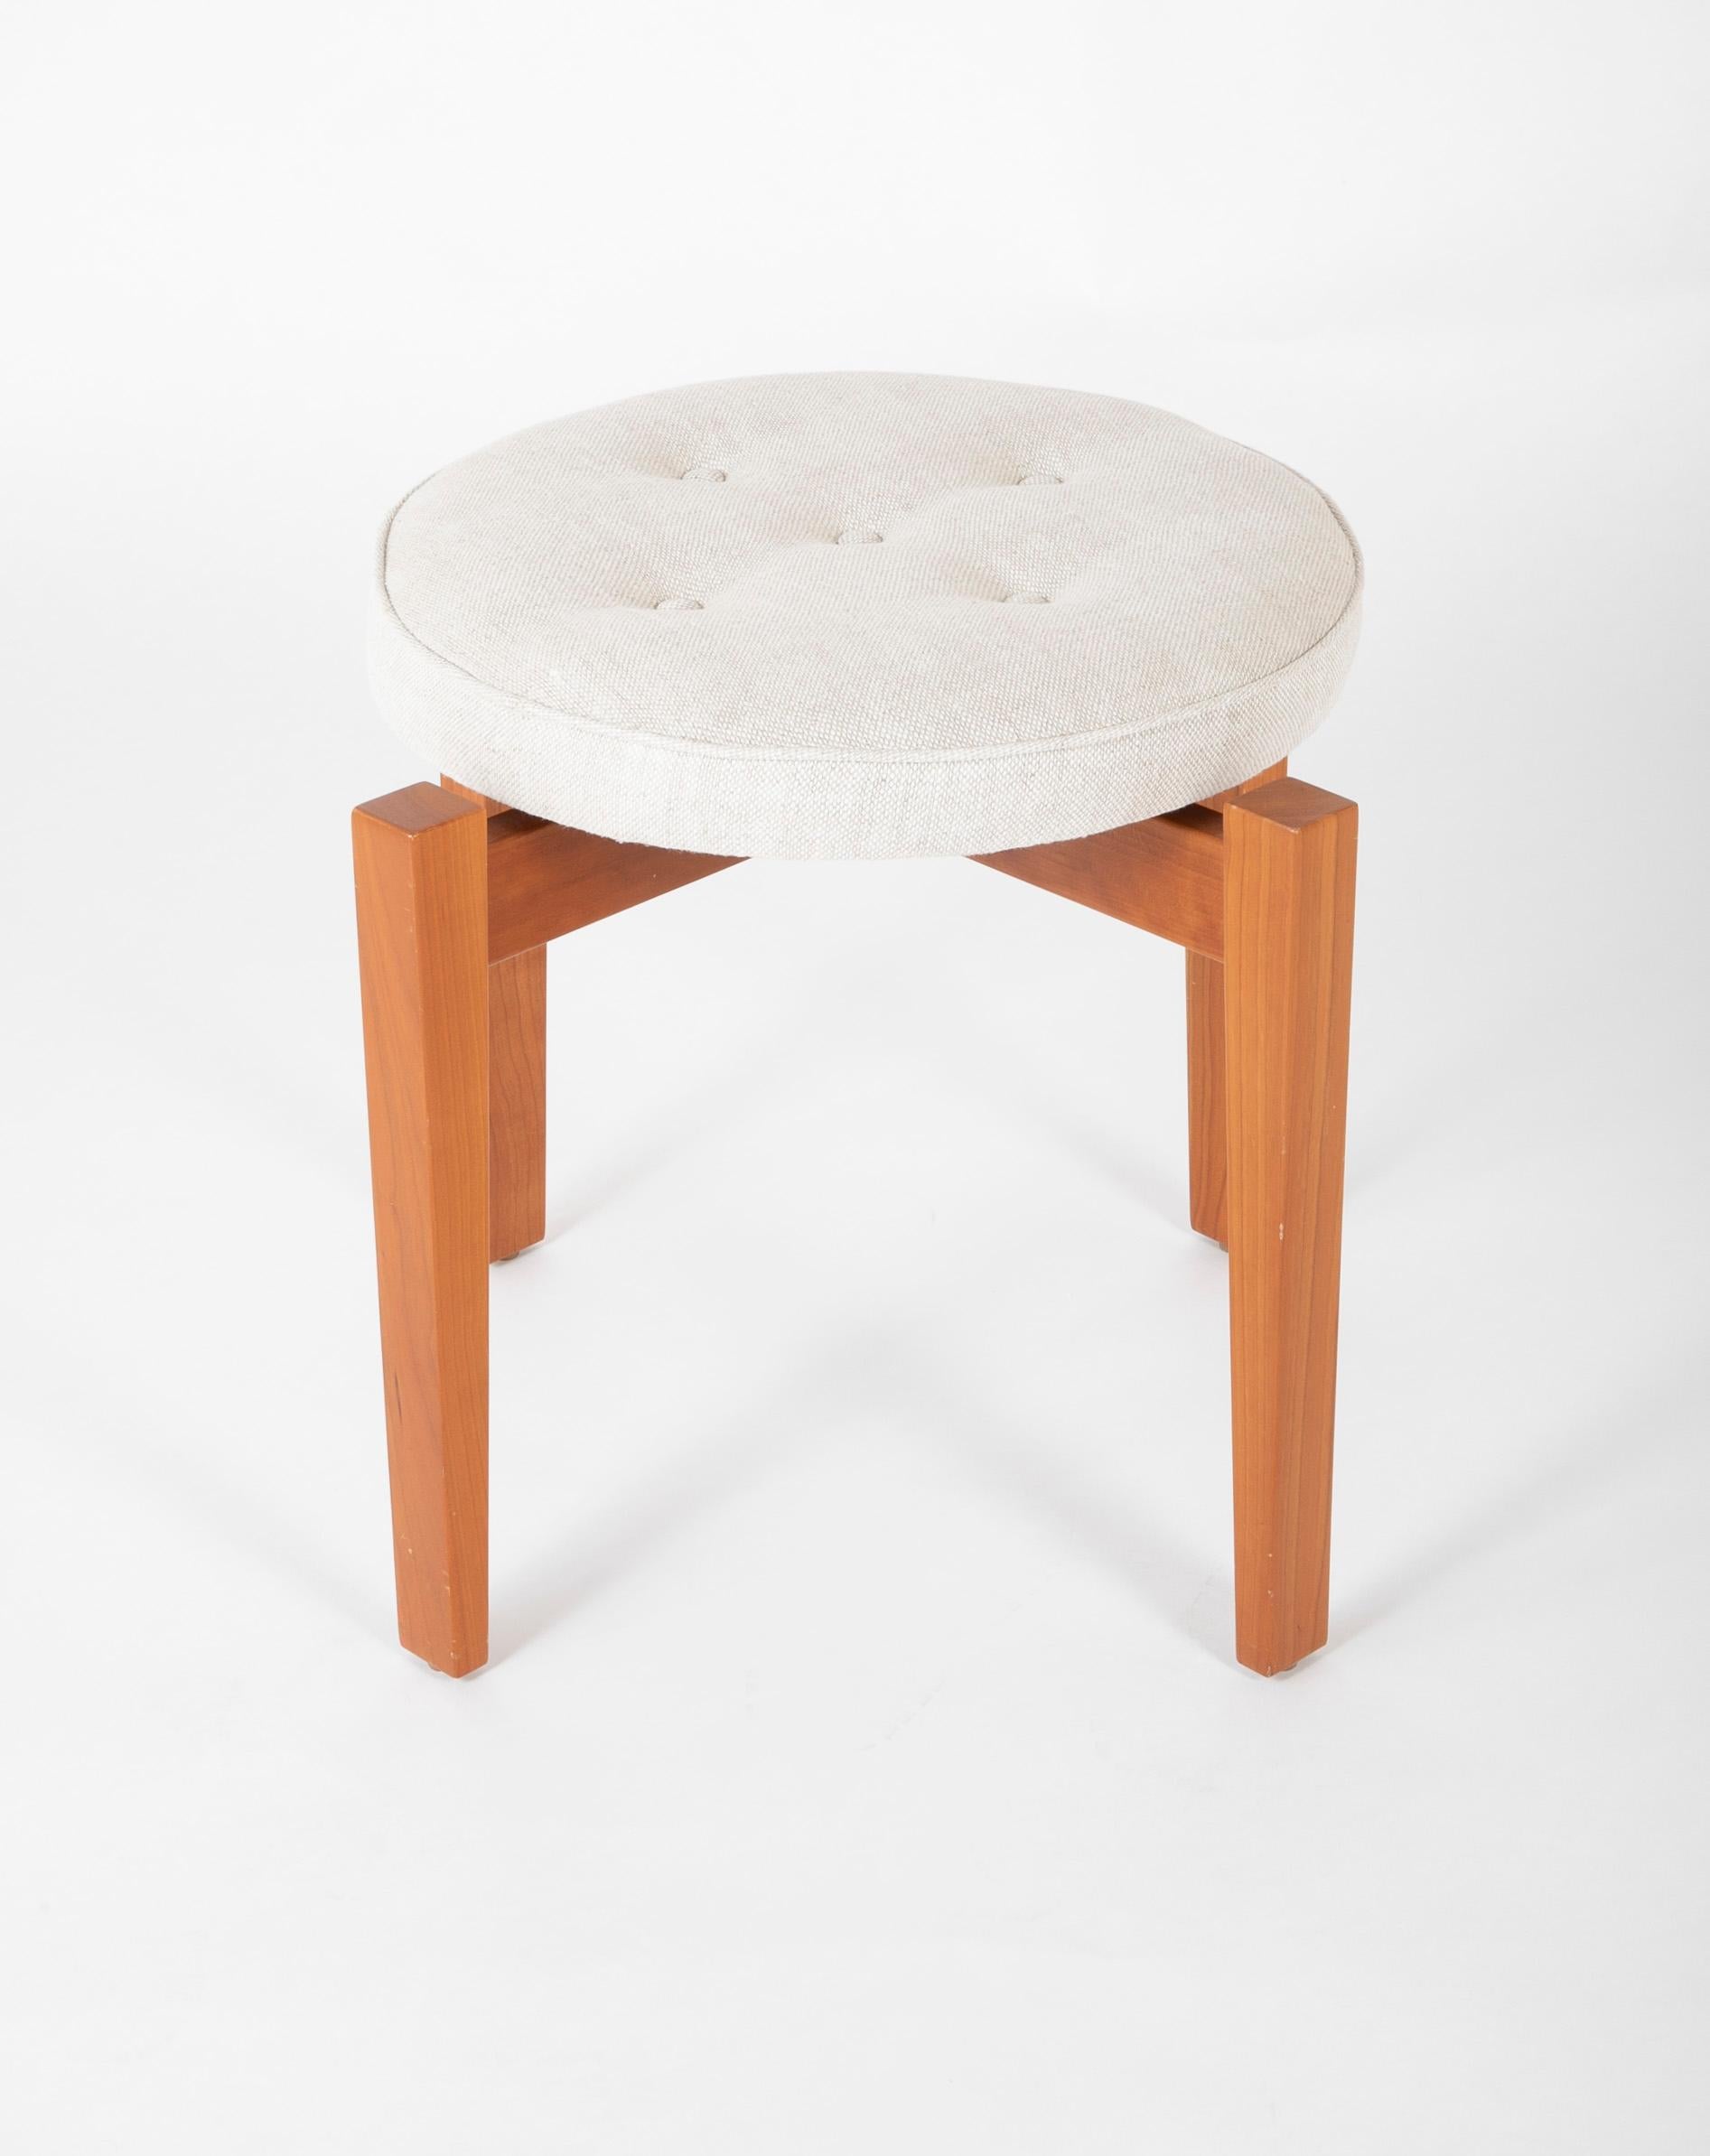 American Pair of Jens Risom for Pucci Stools